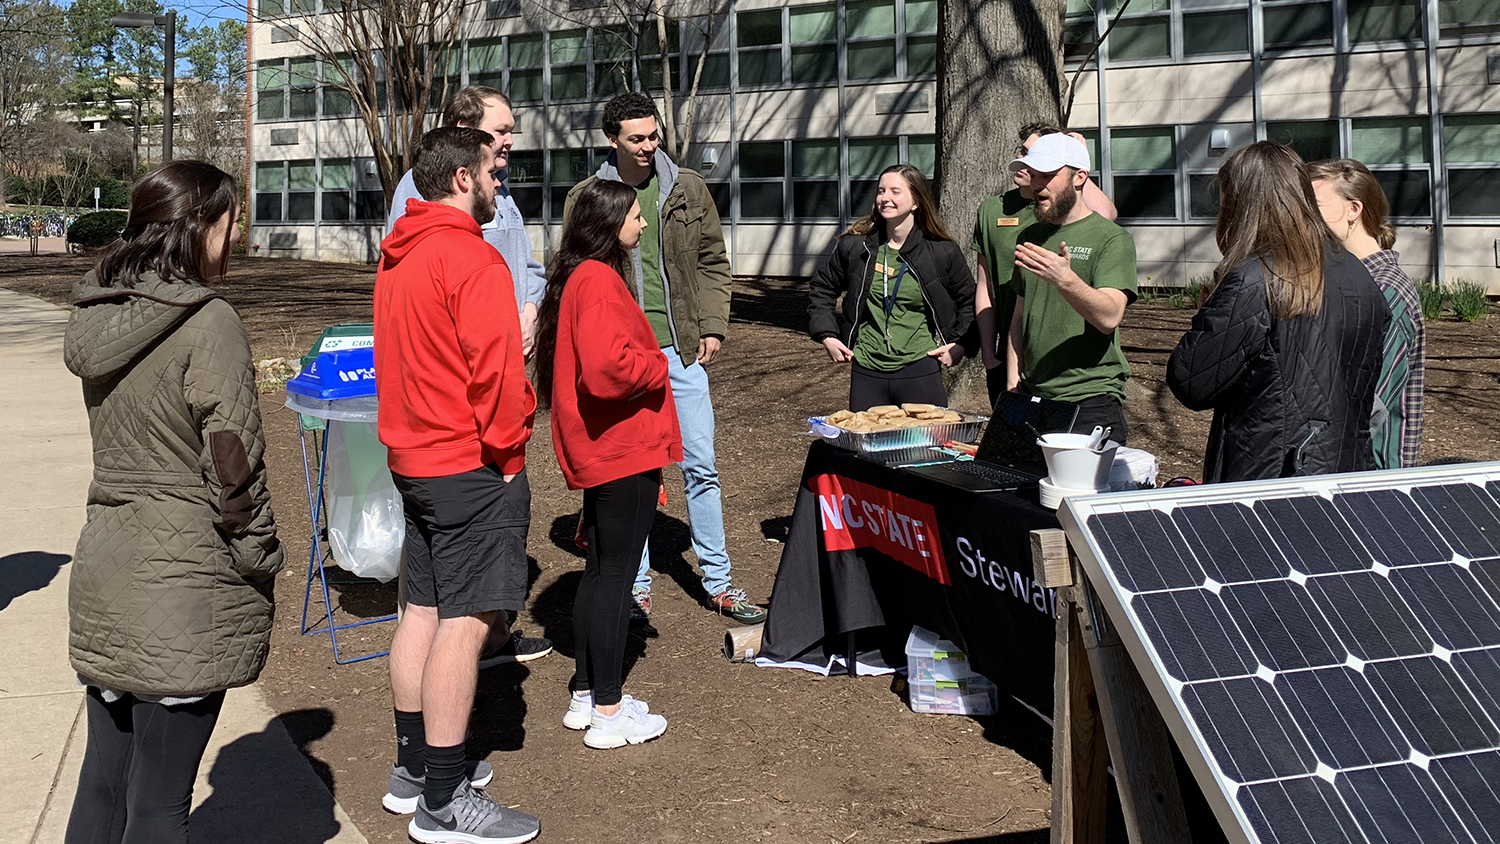 NC State Stewards, wearing matching green T-shirts, speak to a small group of fellow students outside next to a solar panel - Finding Your Wolfpack: Floursih With Sustainability - Forest Biomaterials NC State University